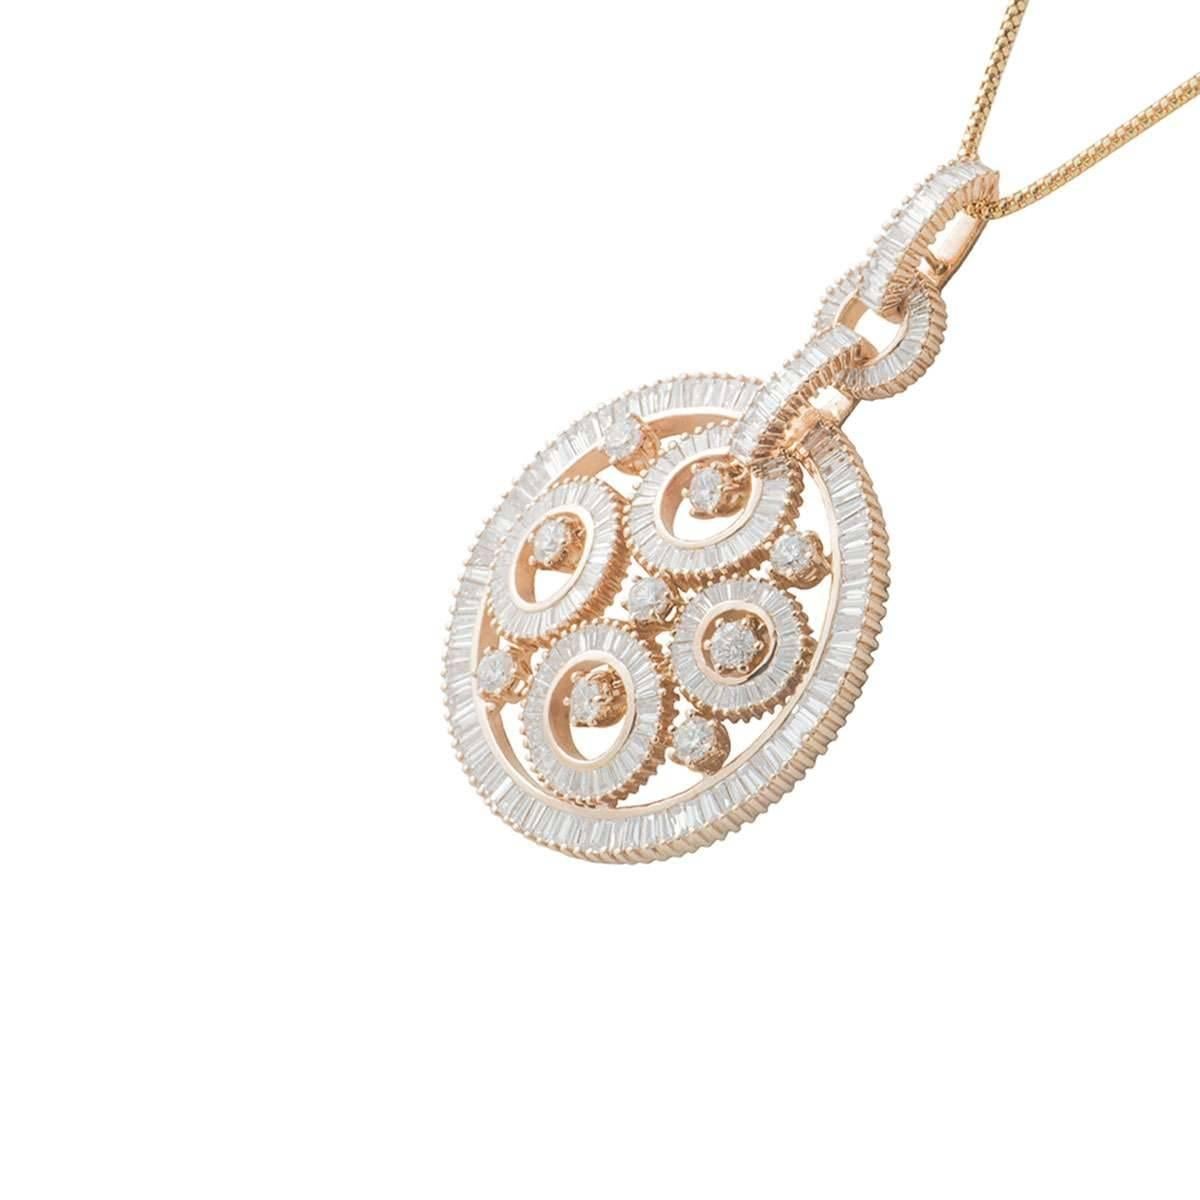 A beautiful 18k rose gold diamond pendant. The pendant comprises of an open work hoops and circles design with 9 round brilliant cut diamonds and 298 baguette cut diamonds. The diamonds have a total diamond weight of approximately 6.86ct, F colour